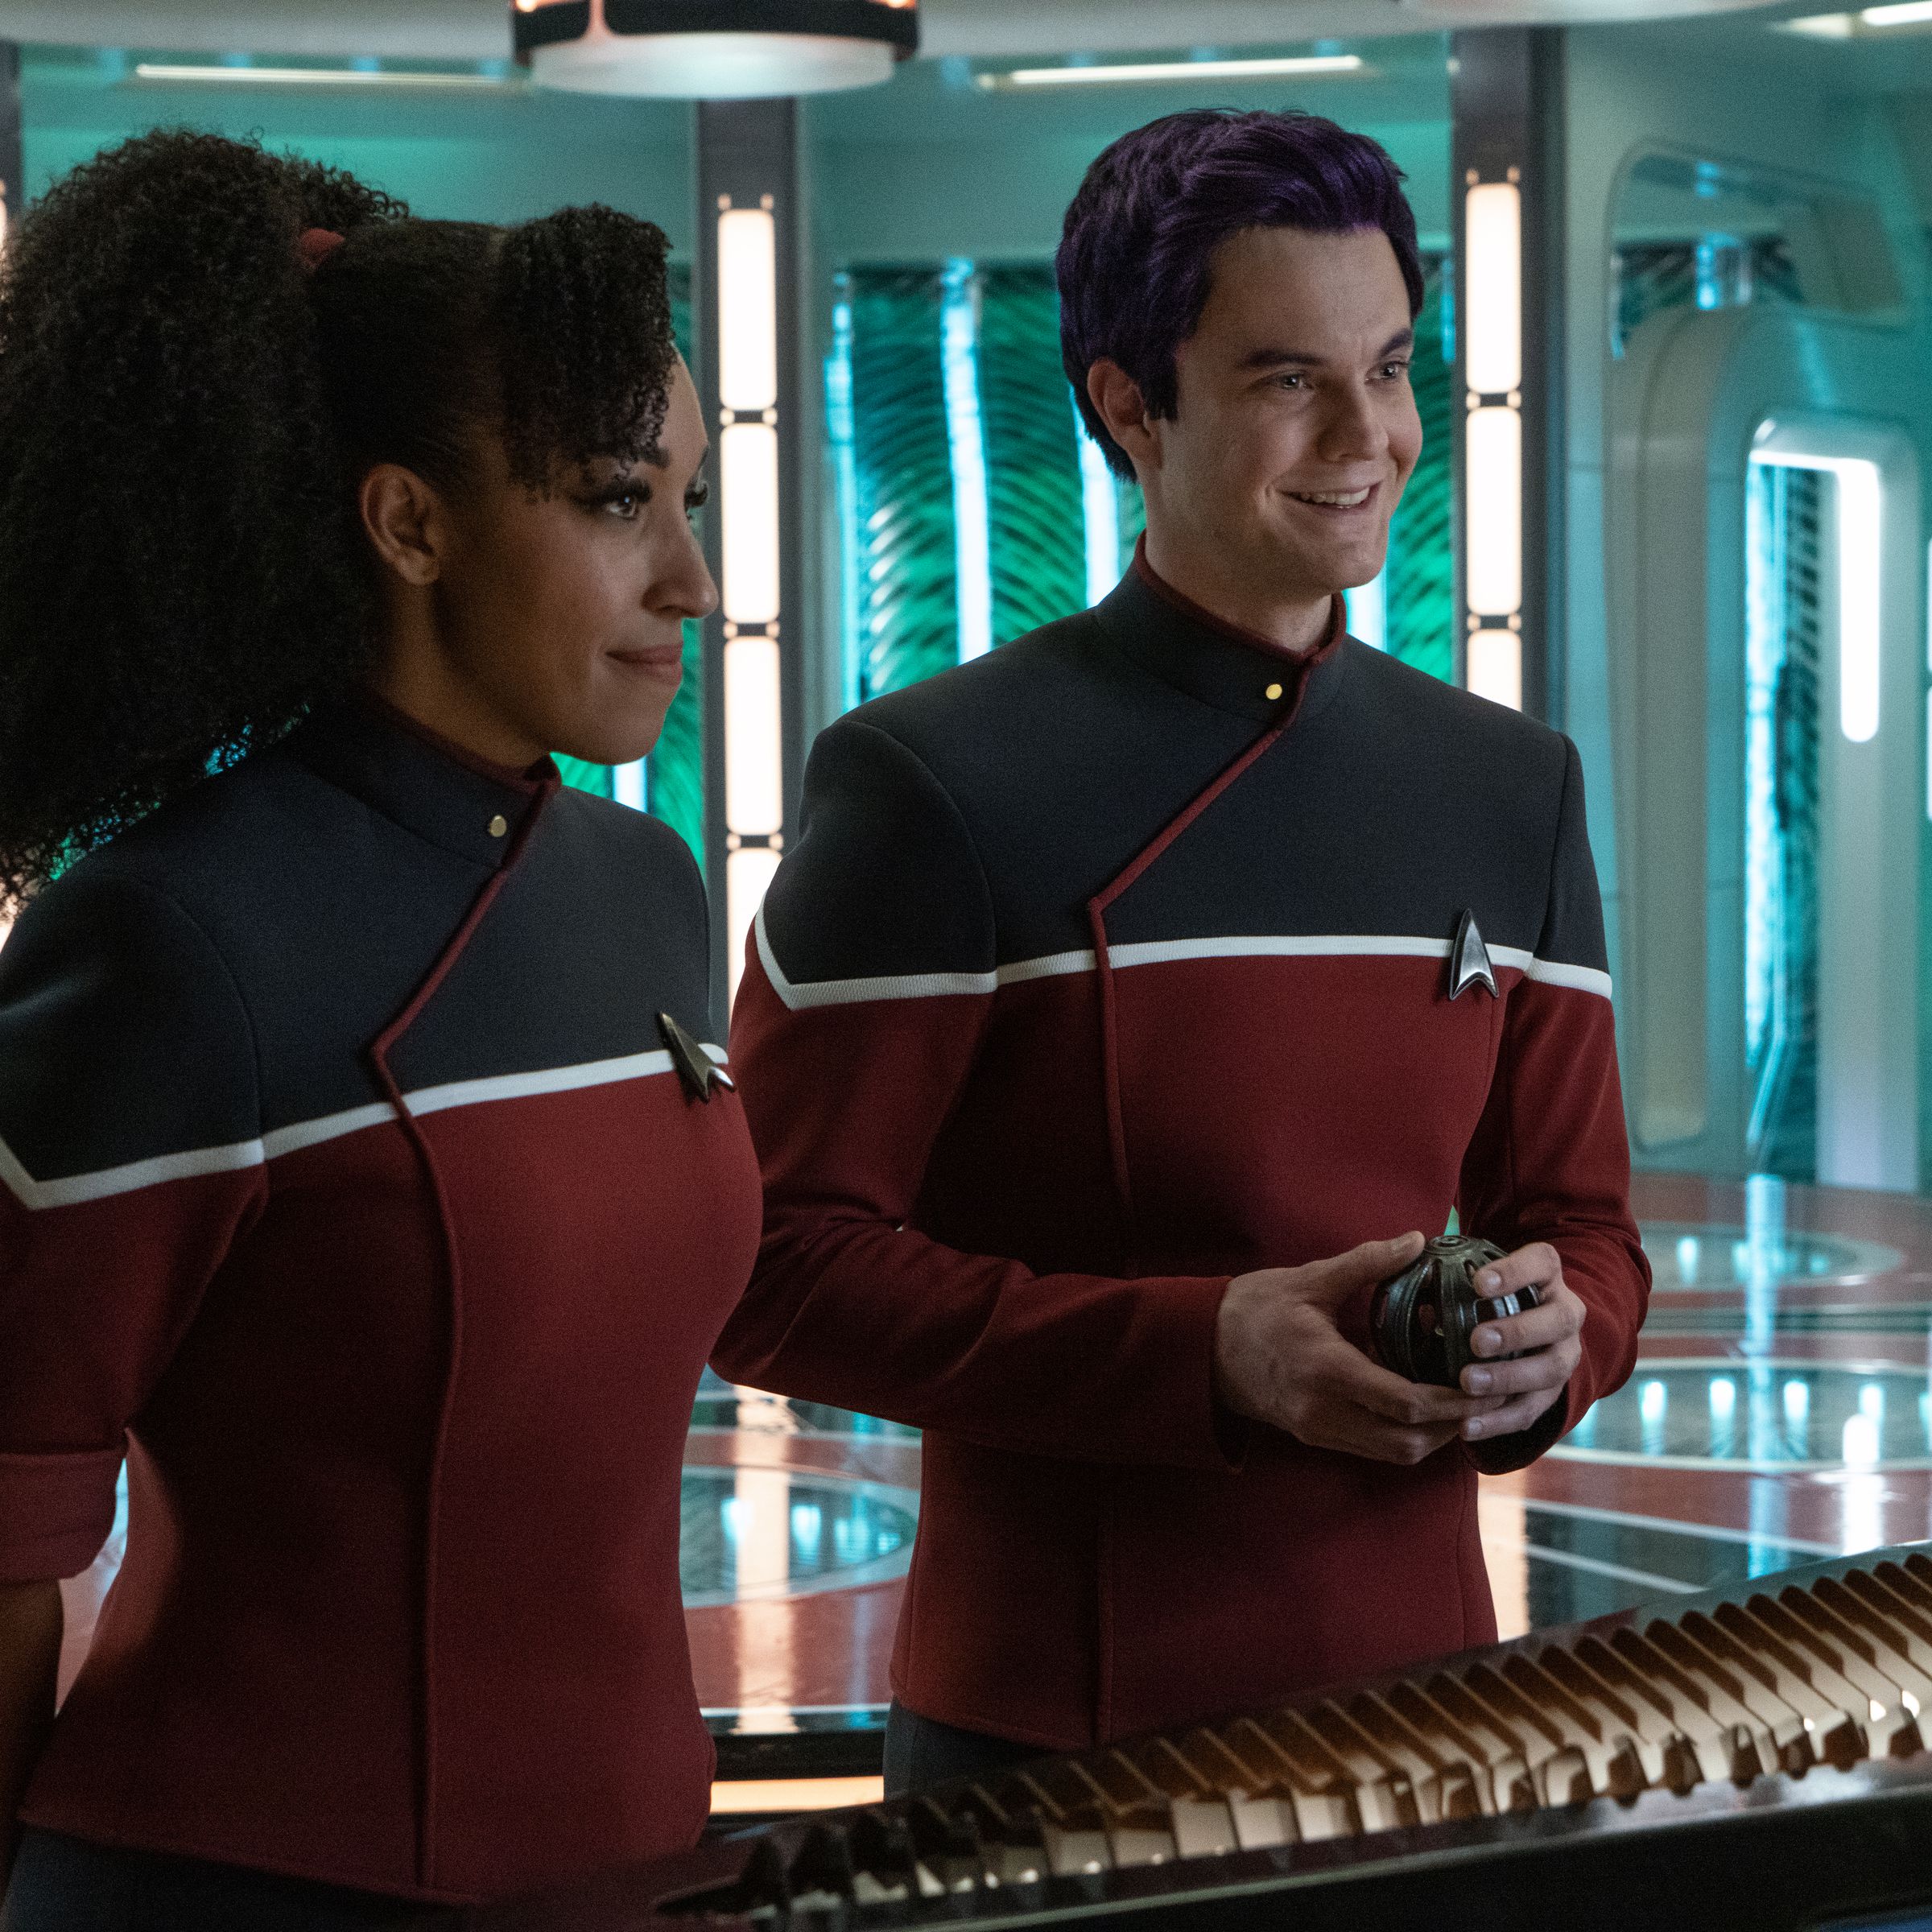 An image of a Black woman with her hair in a ponytail and a white man, with purple hair. They are standing in the transporter room of a Star Trek set and wearing black and red uniforms.